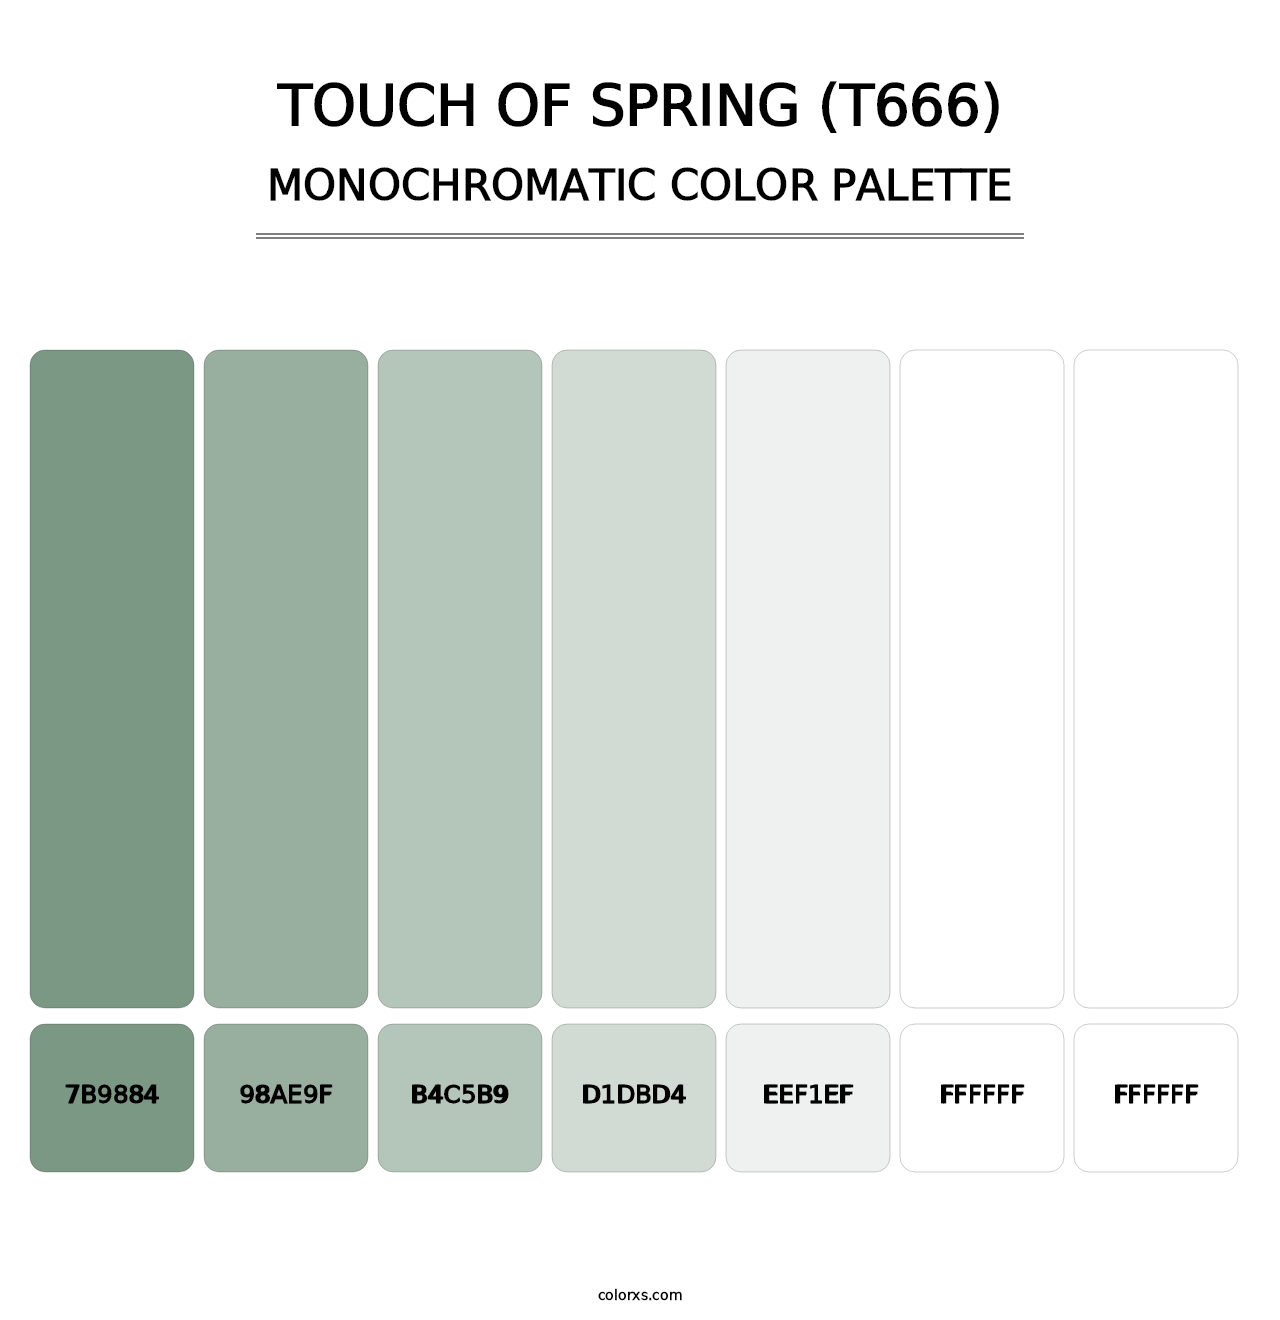 Touch of Spring (T666) - Monochromatic Color Palette